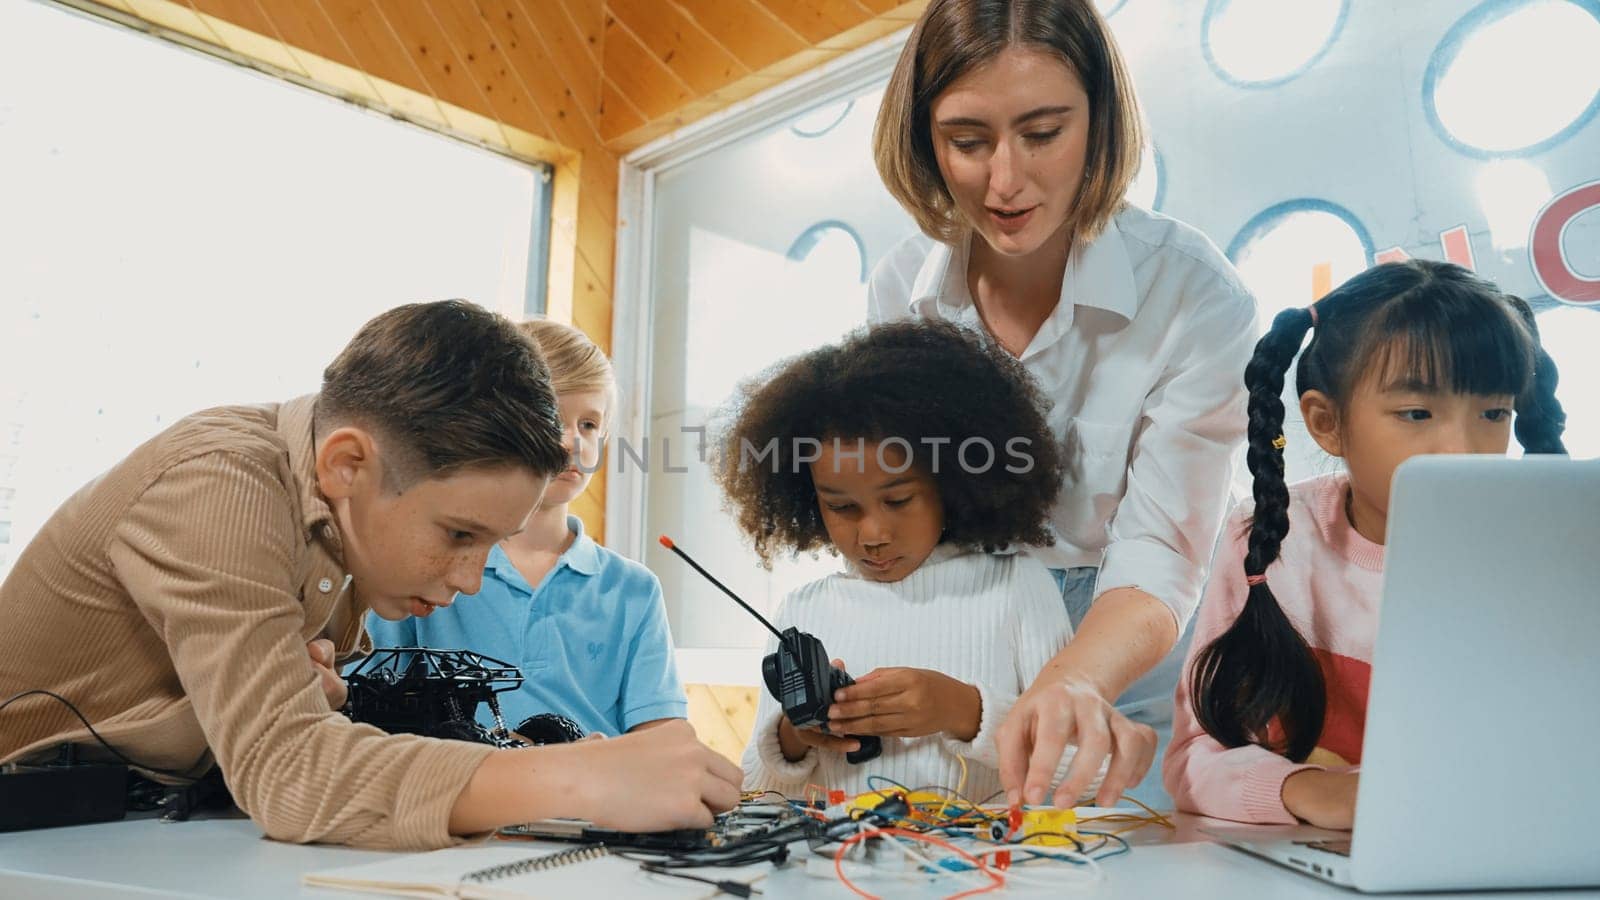 Teacher teach and explain students about digital electrical tool or car model. Diverse kid learn electronic equipment and use to fix motherboard or robotic model at table with wires placed. Erudition.